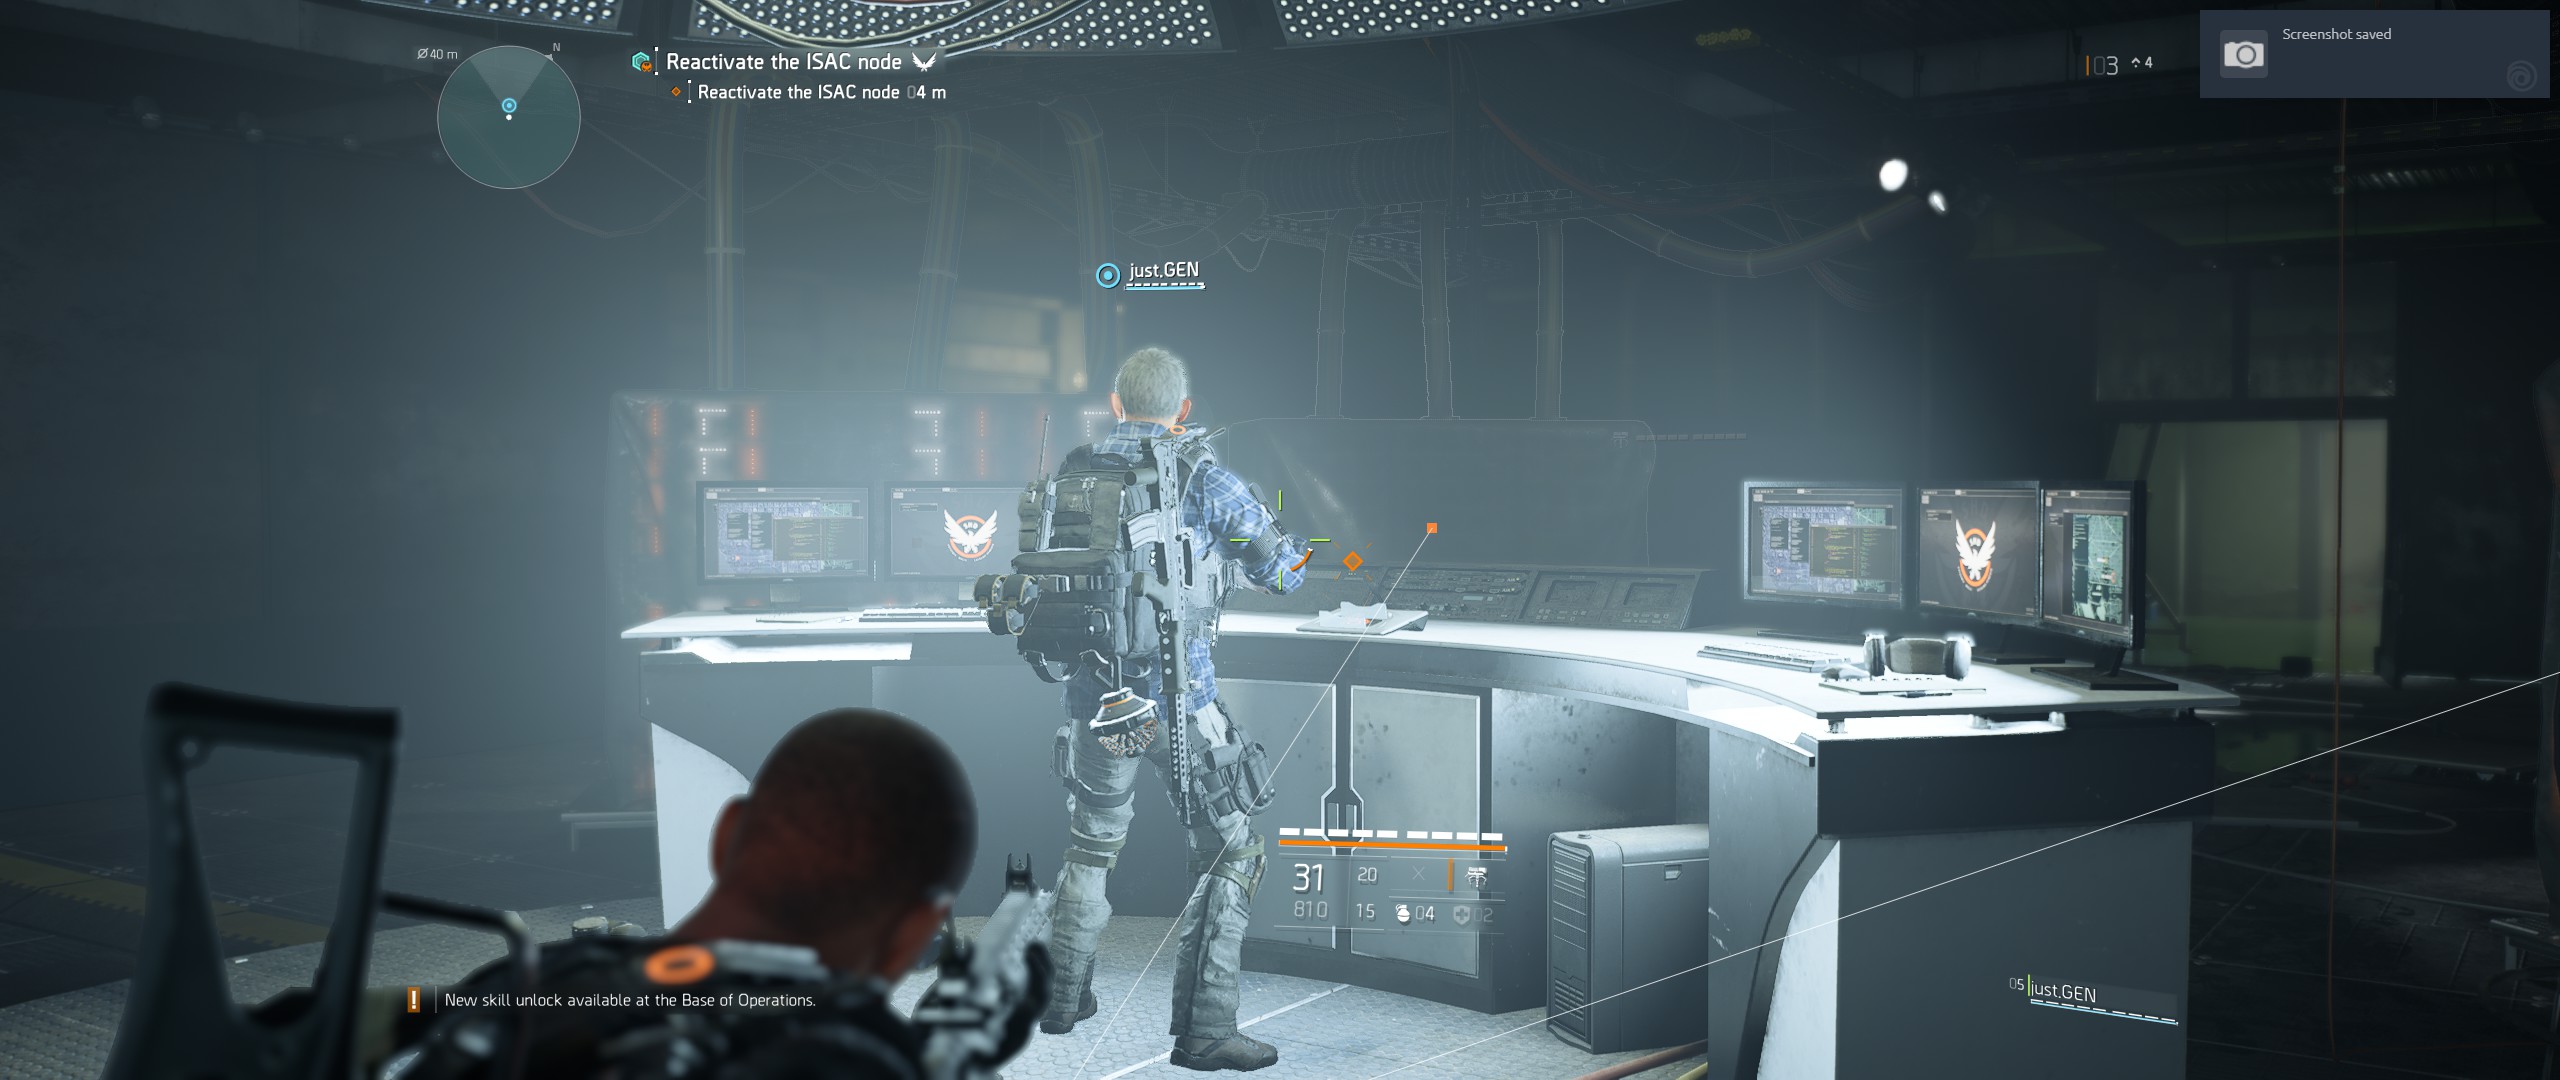 Tom Clancy's The Division® 22019-5-26-13-16-49.jpg